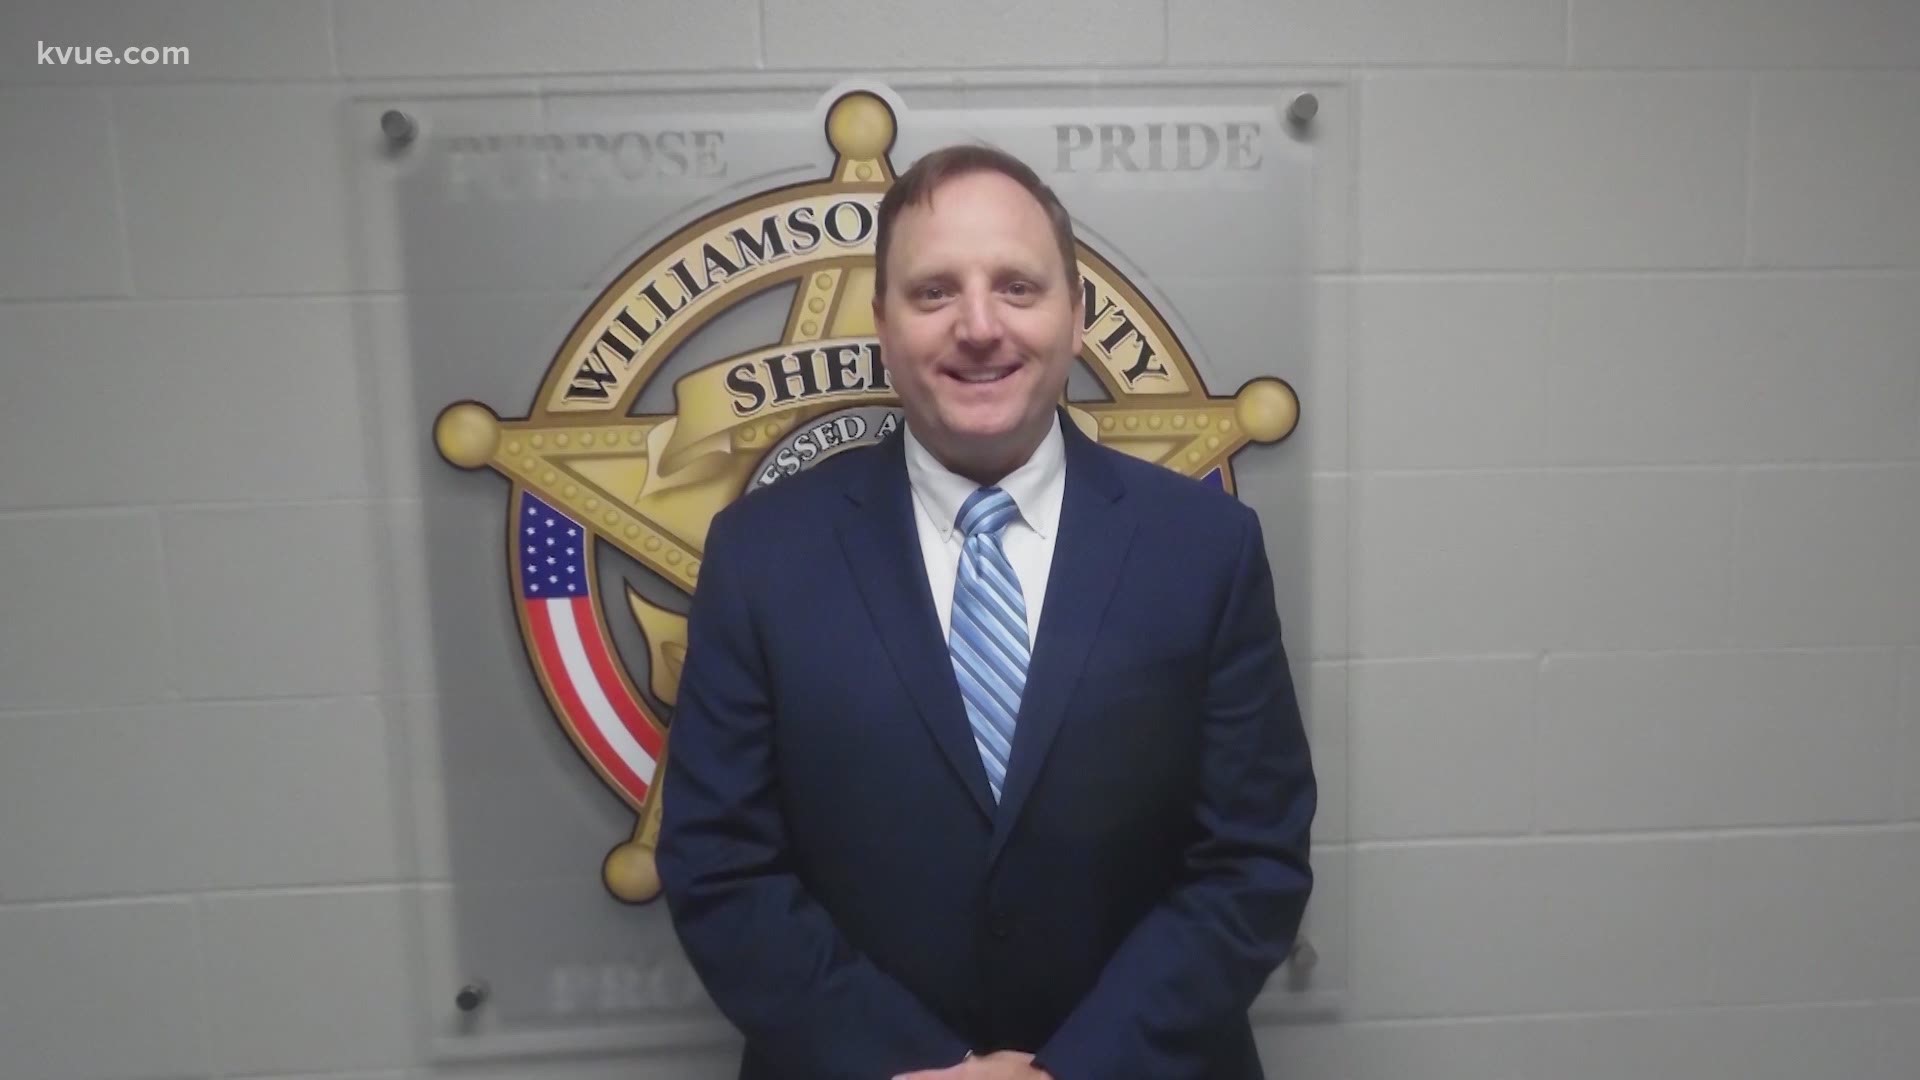 A former Williamson County investigator said emotions are high at the Williamson County Sheriff's Office following Sheriff Robert Chody's indictment.